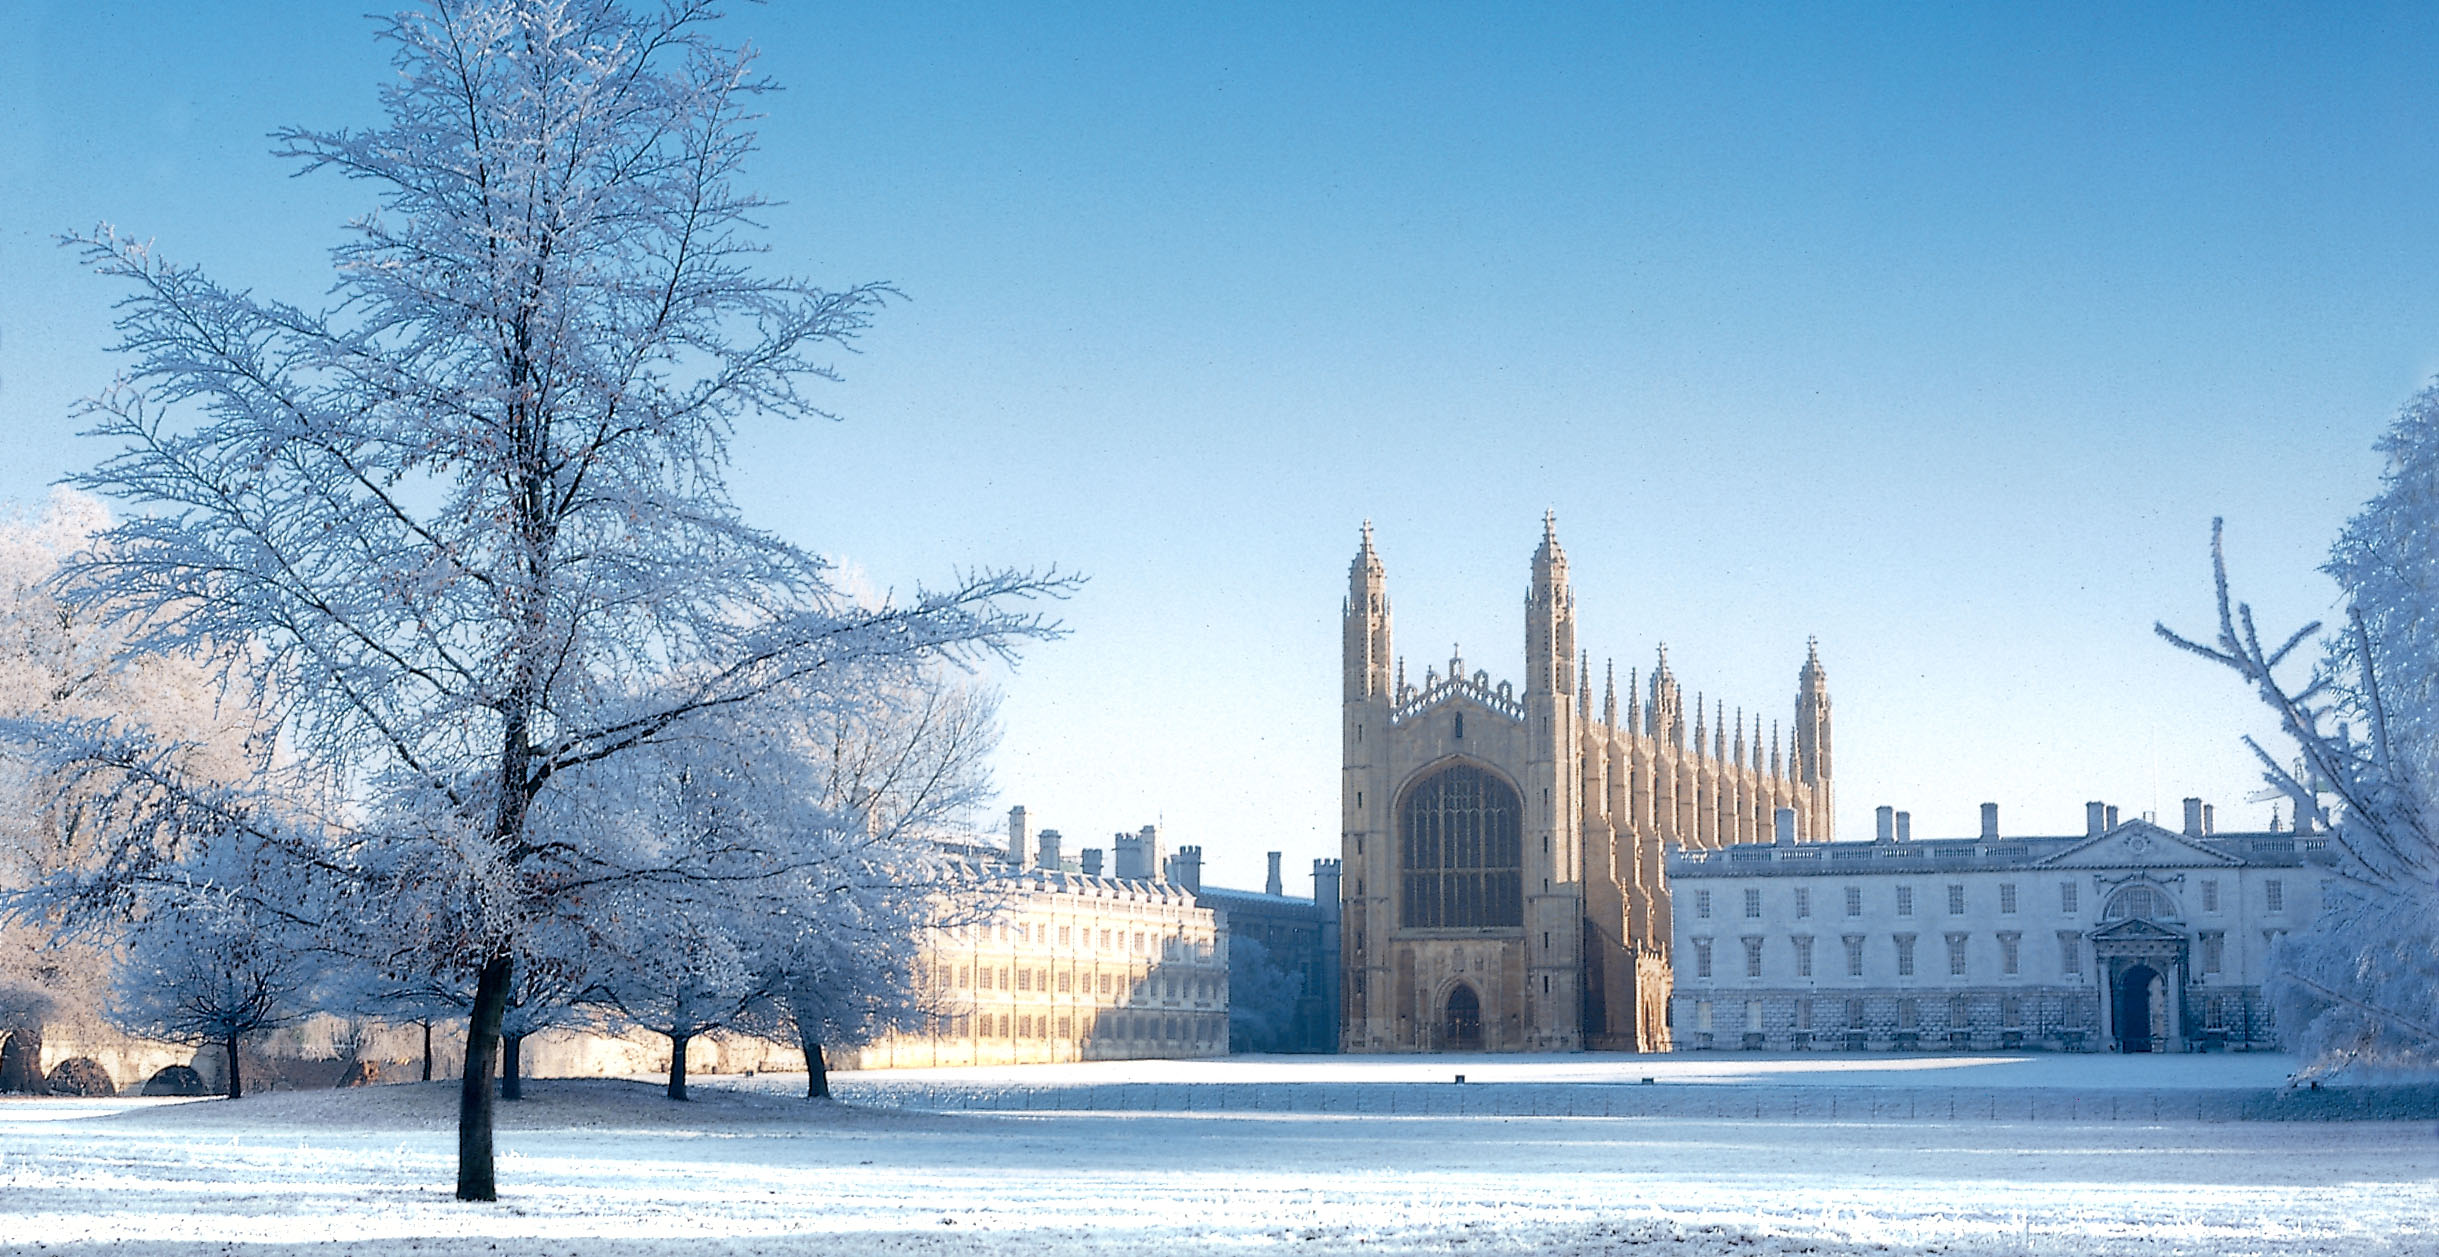 Kings College from 'The Backs' in Cambridge. Image: Getty